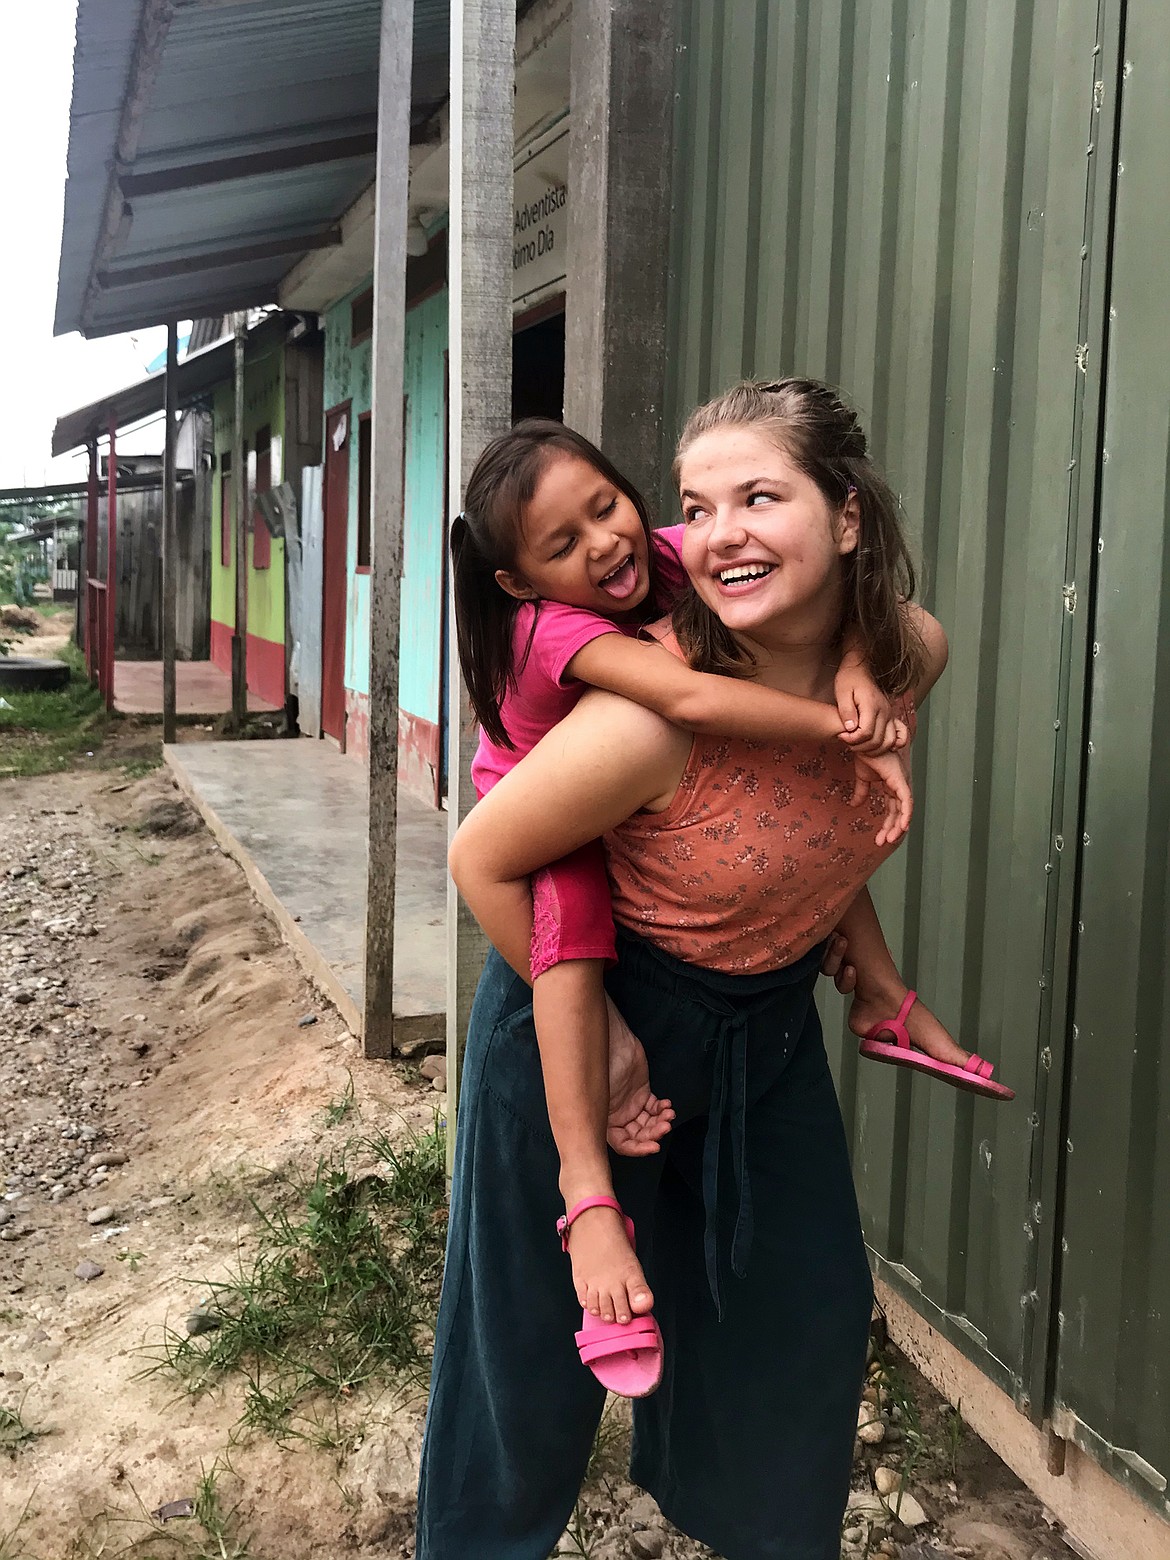 Brooke Sample gives a piggy-back ride while in Peru. (Photo provided)